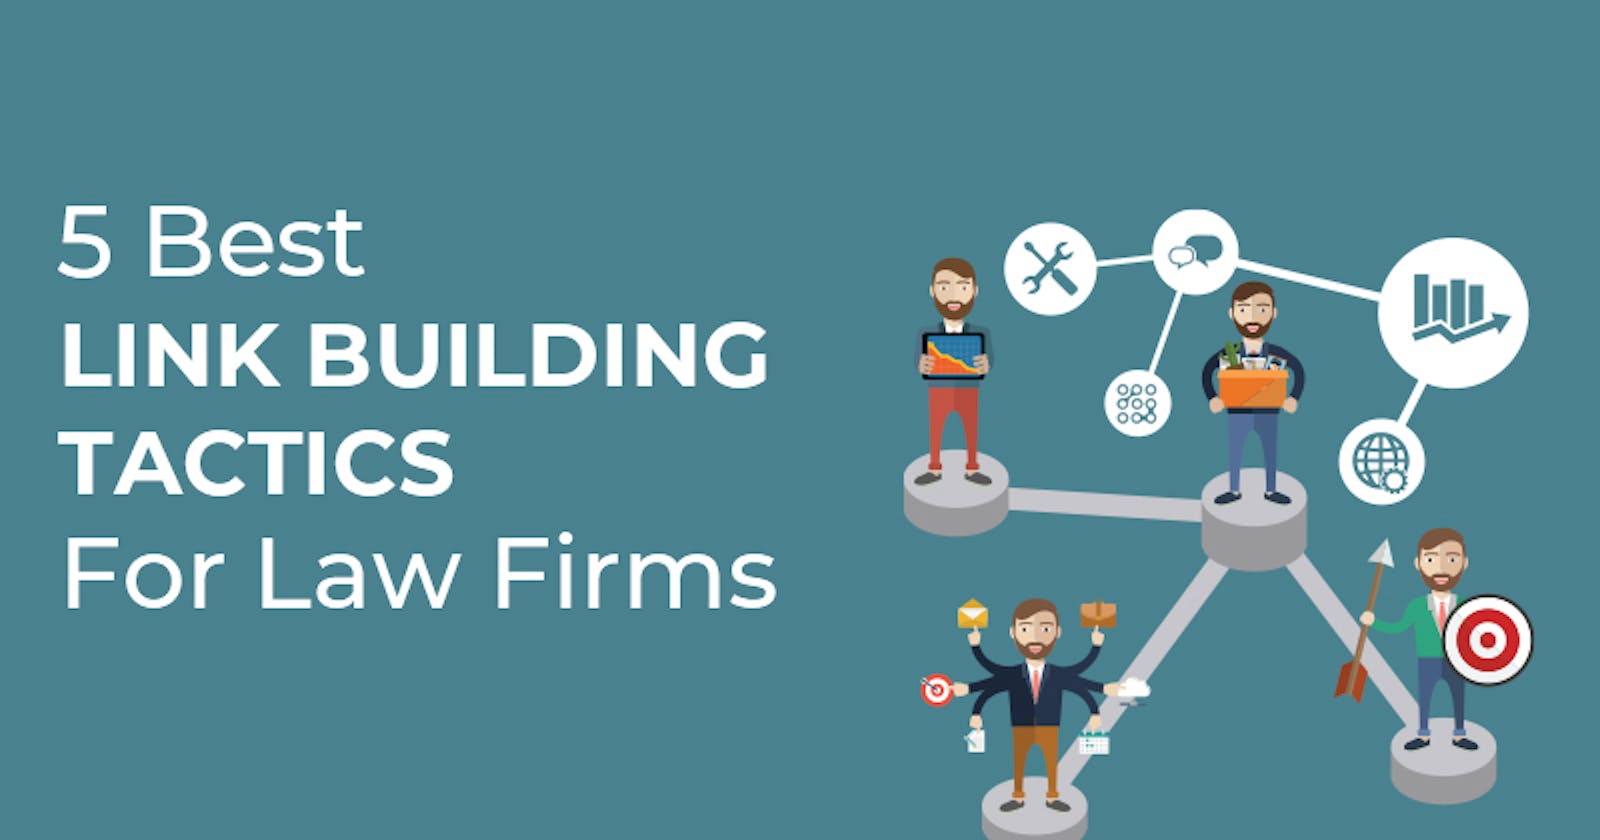 5 Best Link Building Tactics For Law Firms